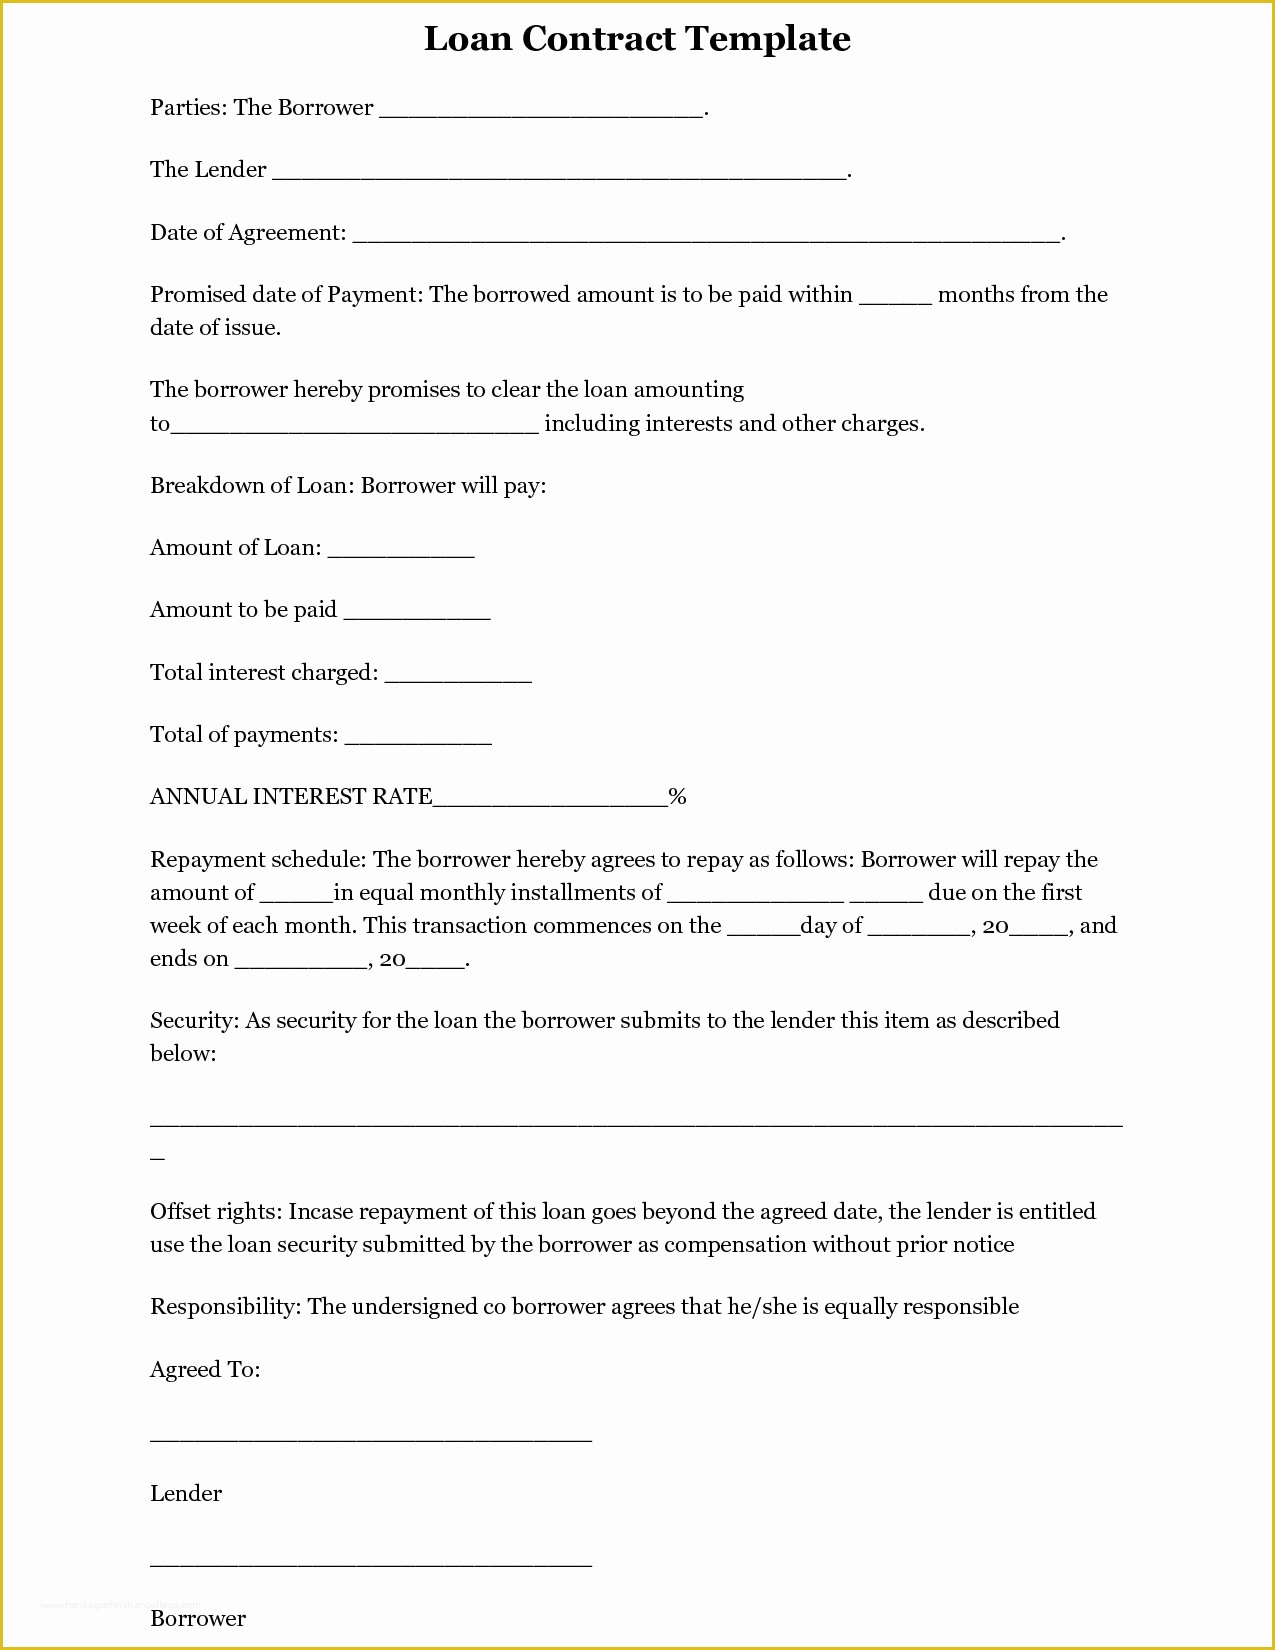 Free Online Loan Agreement Template Of Printable Sample Loan Template form